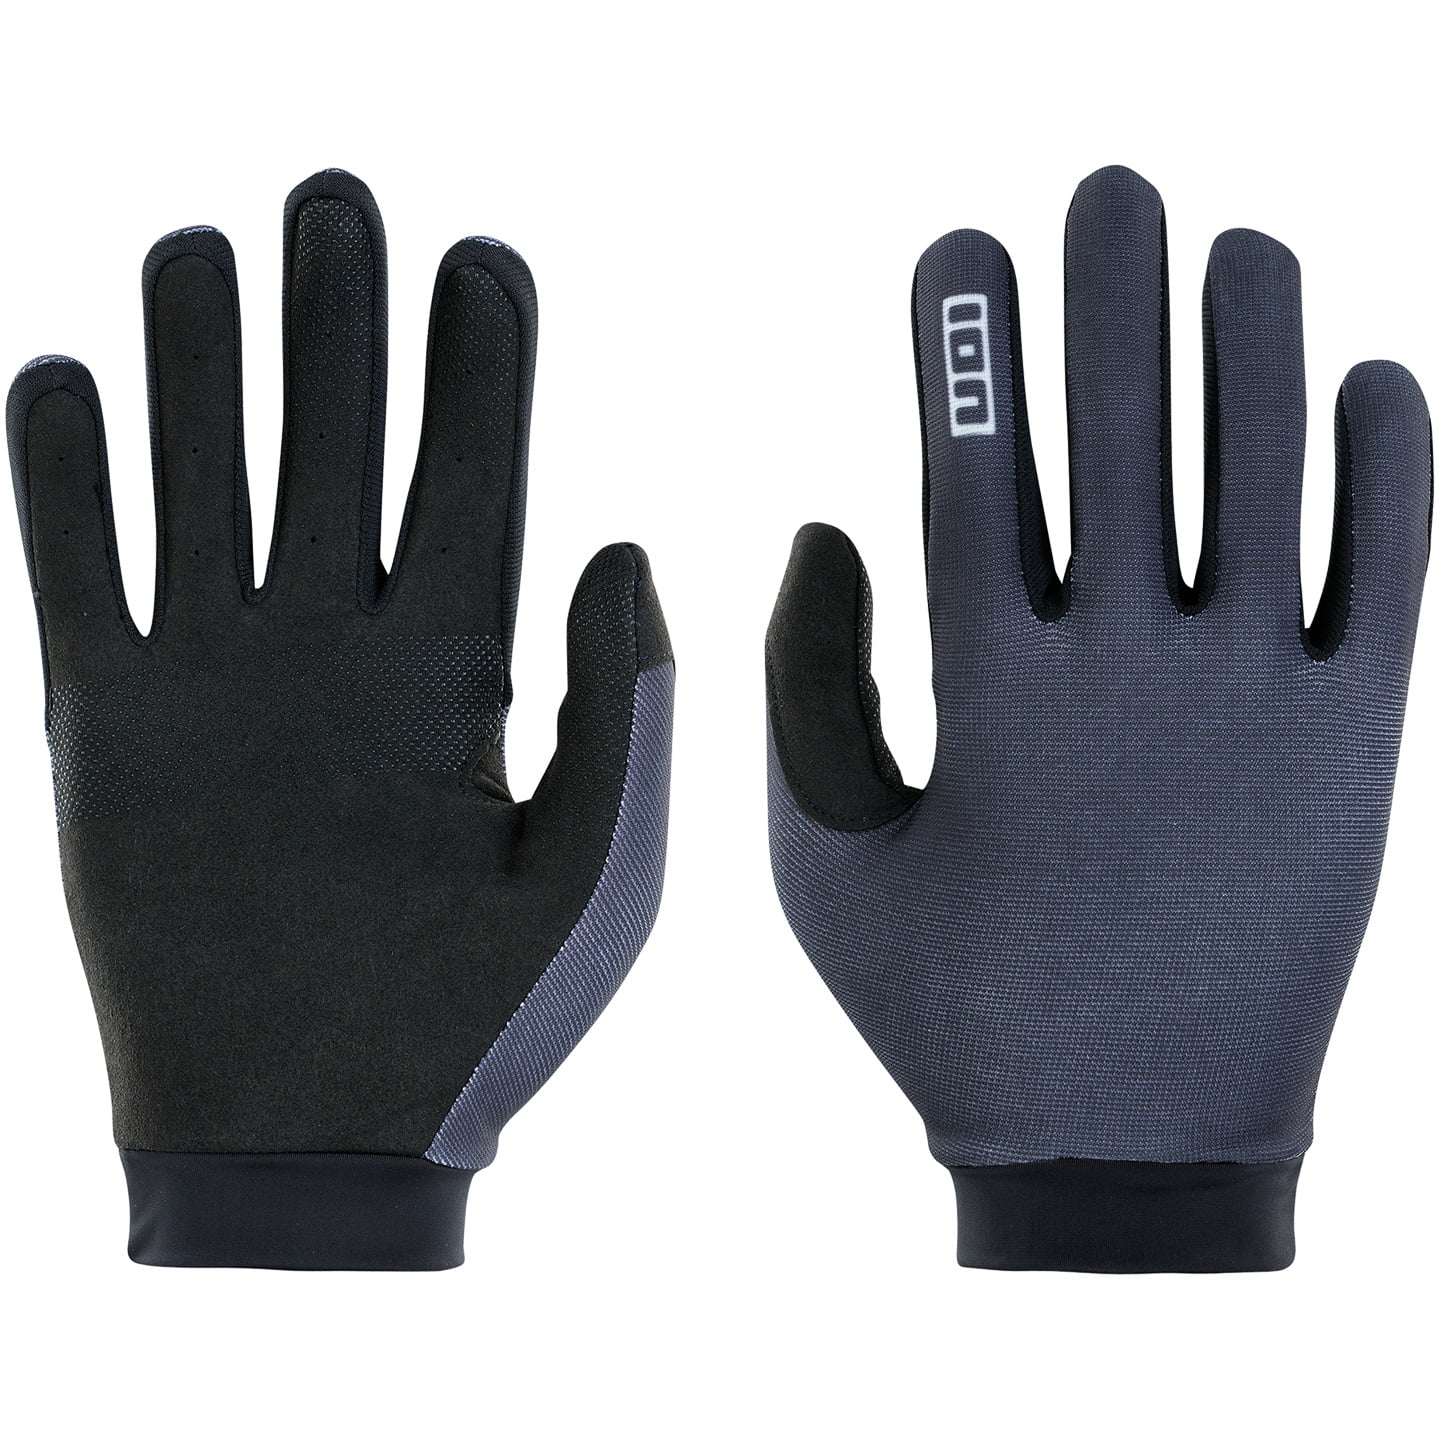 ION Logo Full Finger Gloves Cycling Gloves, for men, size L, Cycling gloves, Bike gear